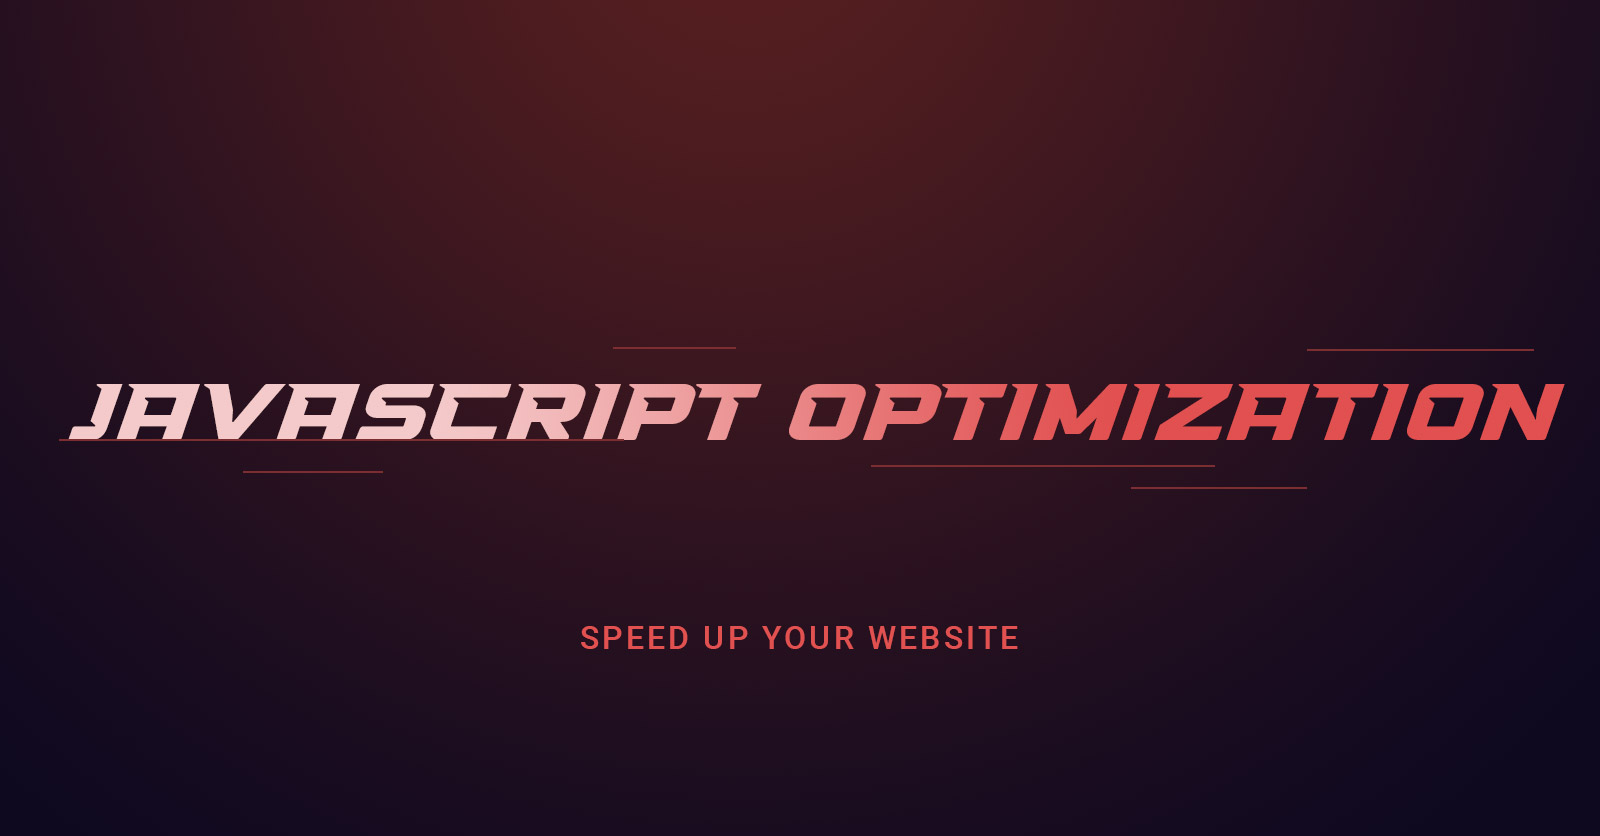 What impact does JavaScript have on the speed and performance of a website?